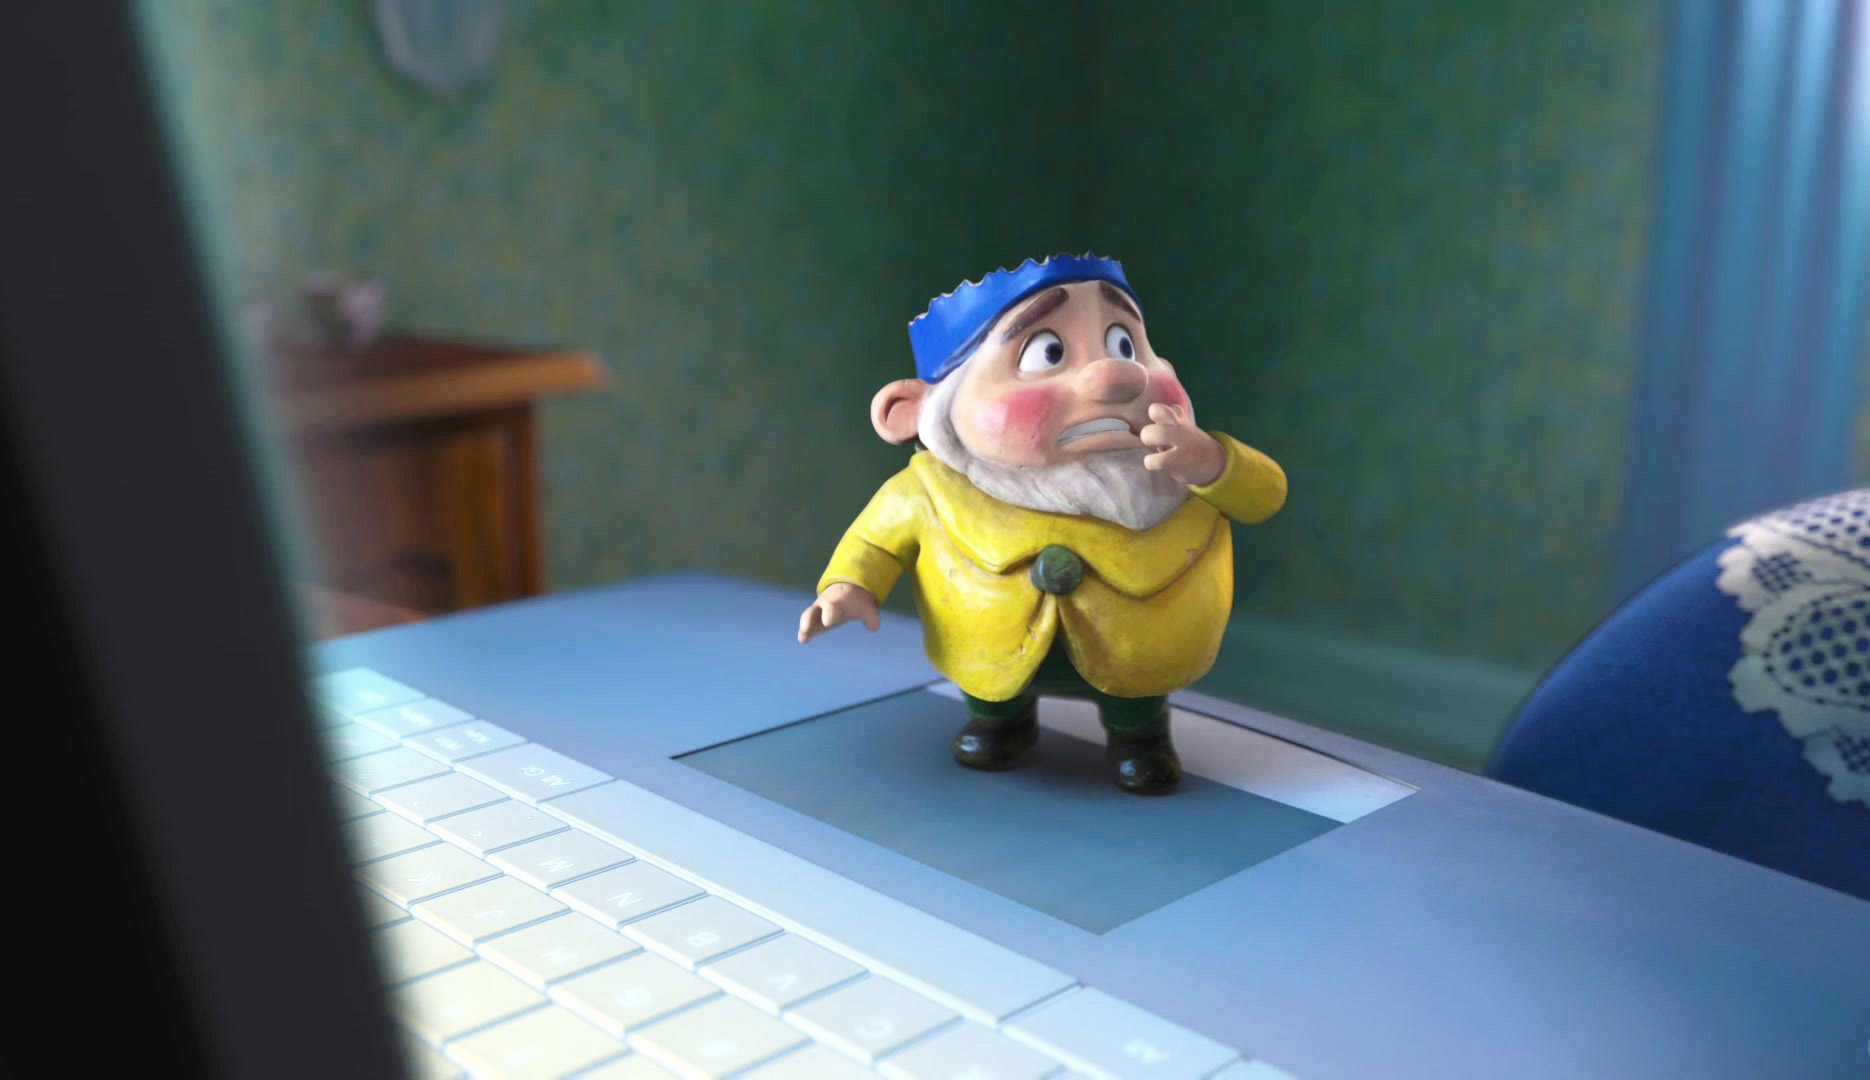 A scene from Touchstone Pictures' Gnomeo and Juliet (2011)